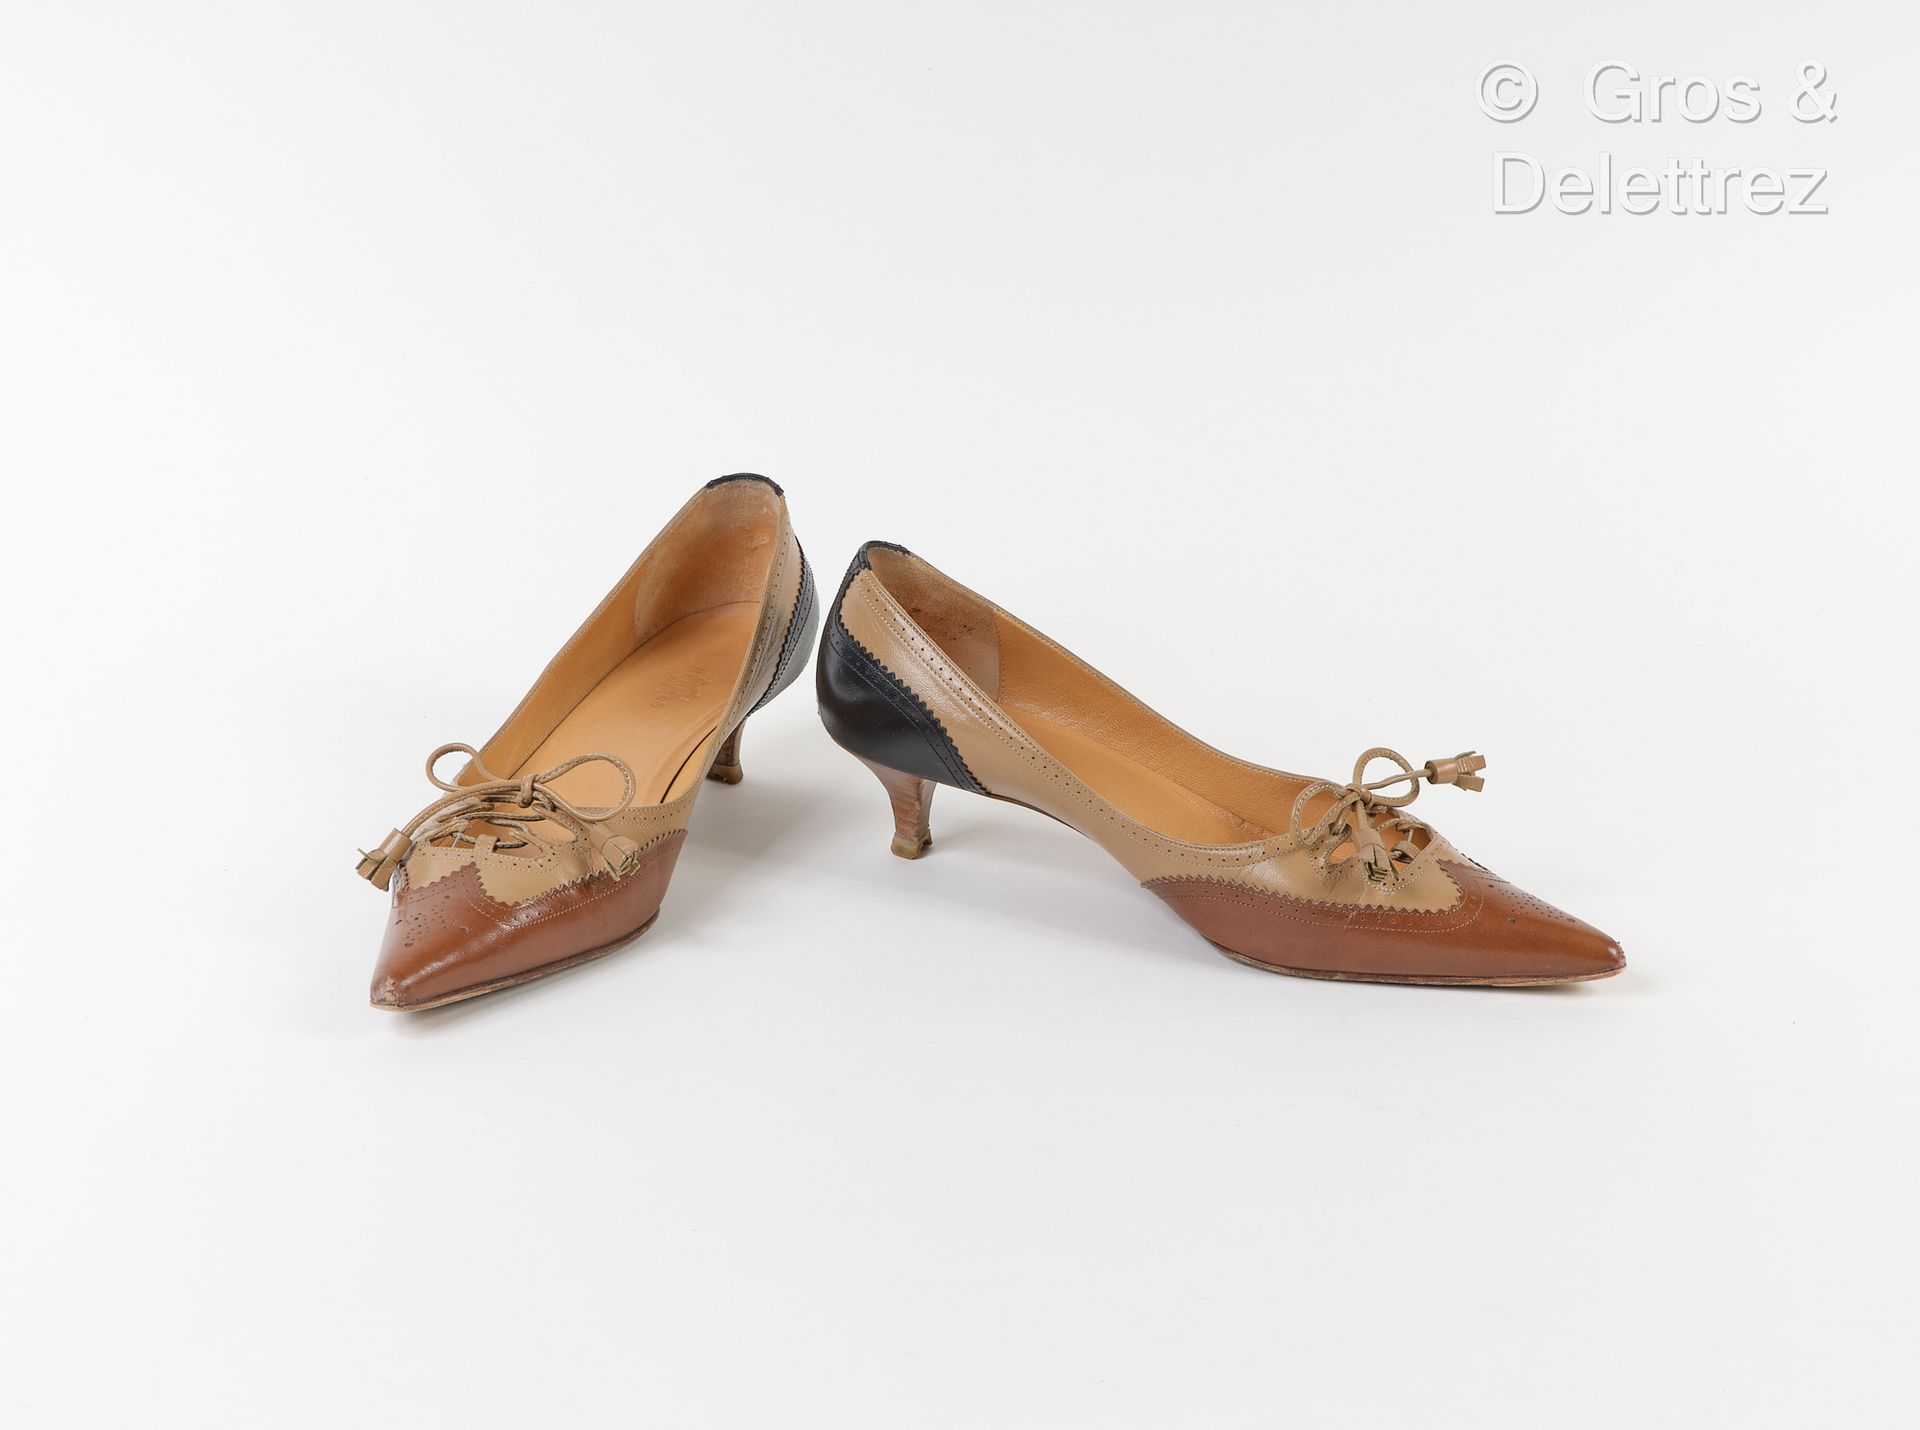 Null HERMES Paris made in Italy - Pair of three-tone leather pumps in cocoa, bei&hellip;